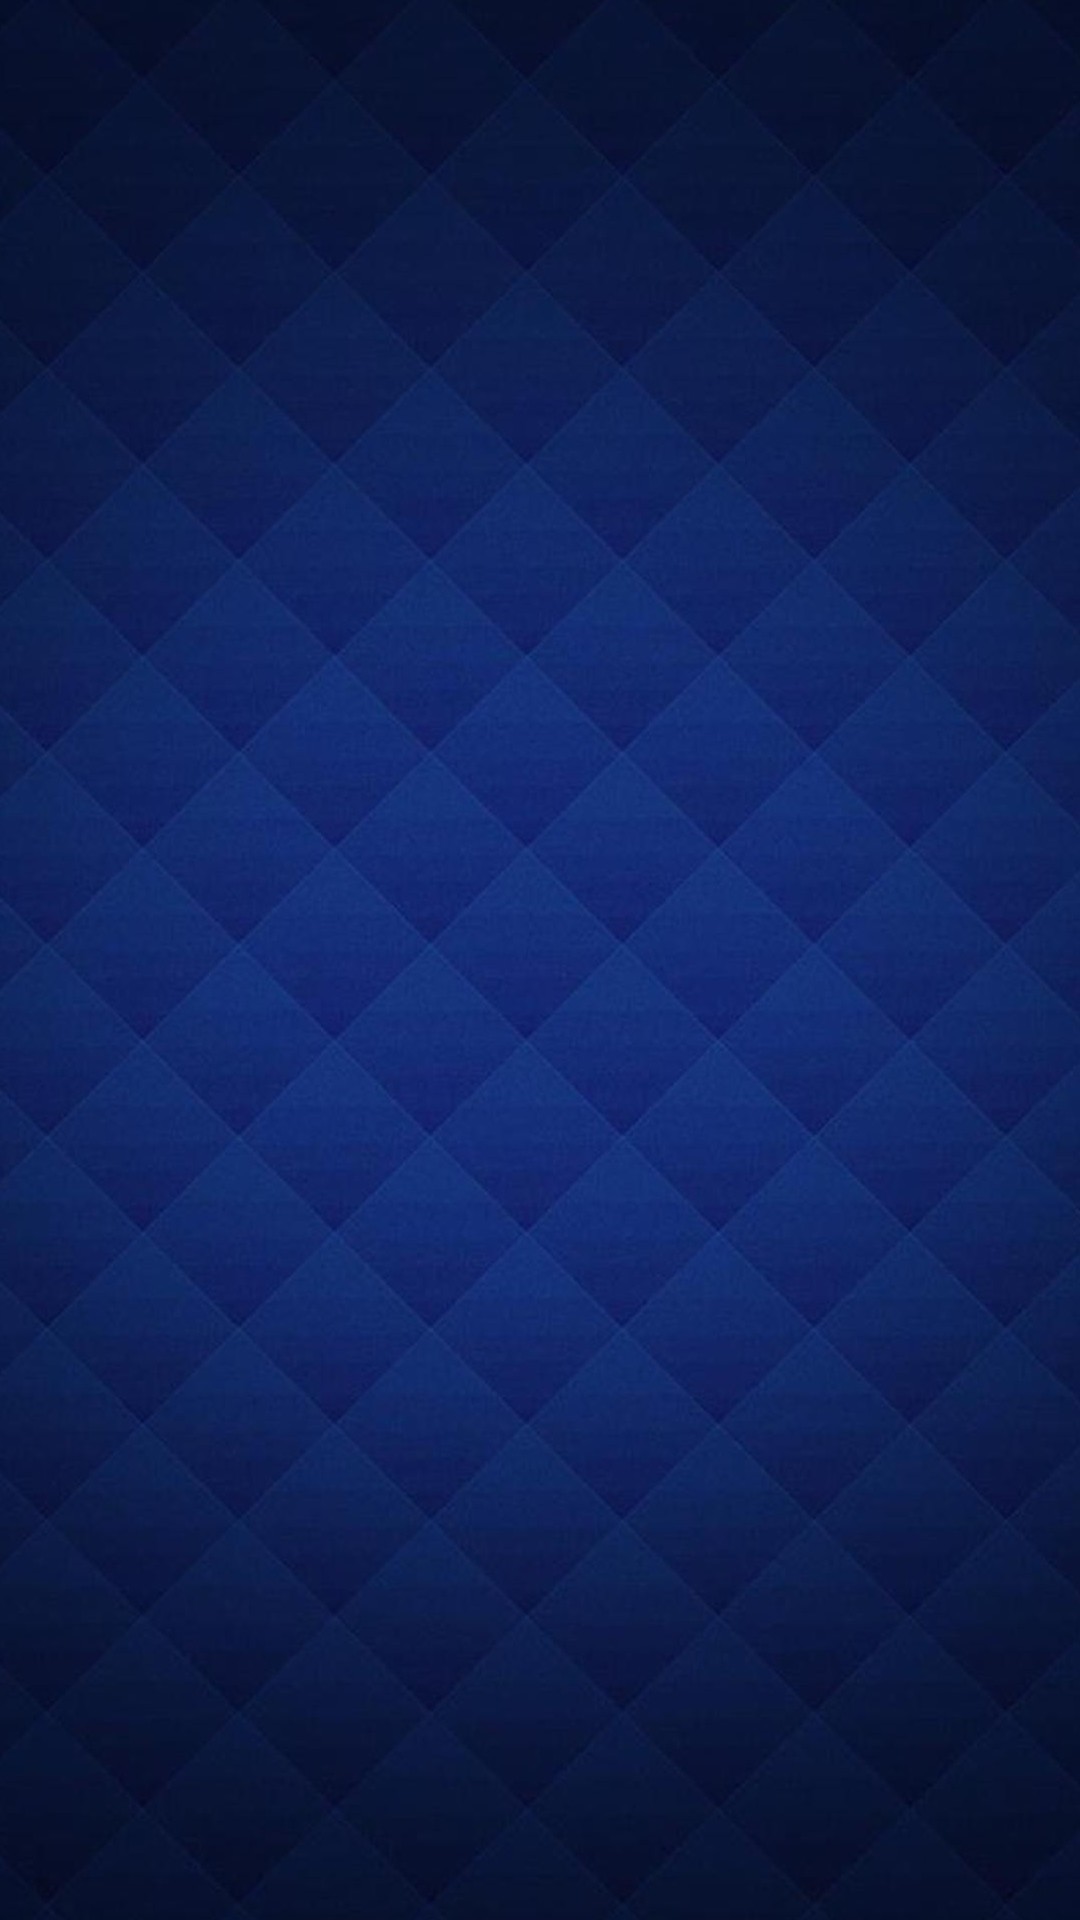 1080x1920 Texture Xperia Z Wallpapers HD 23